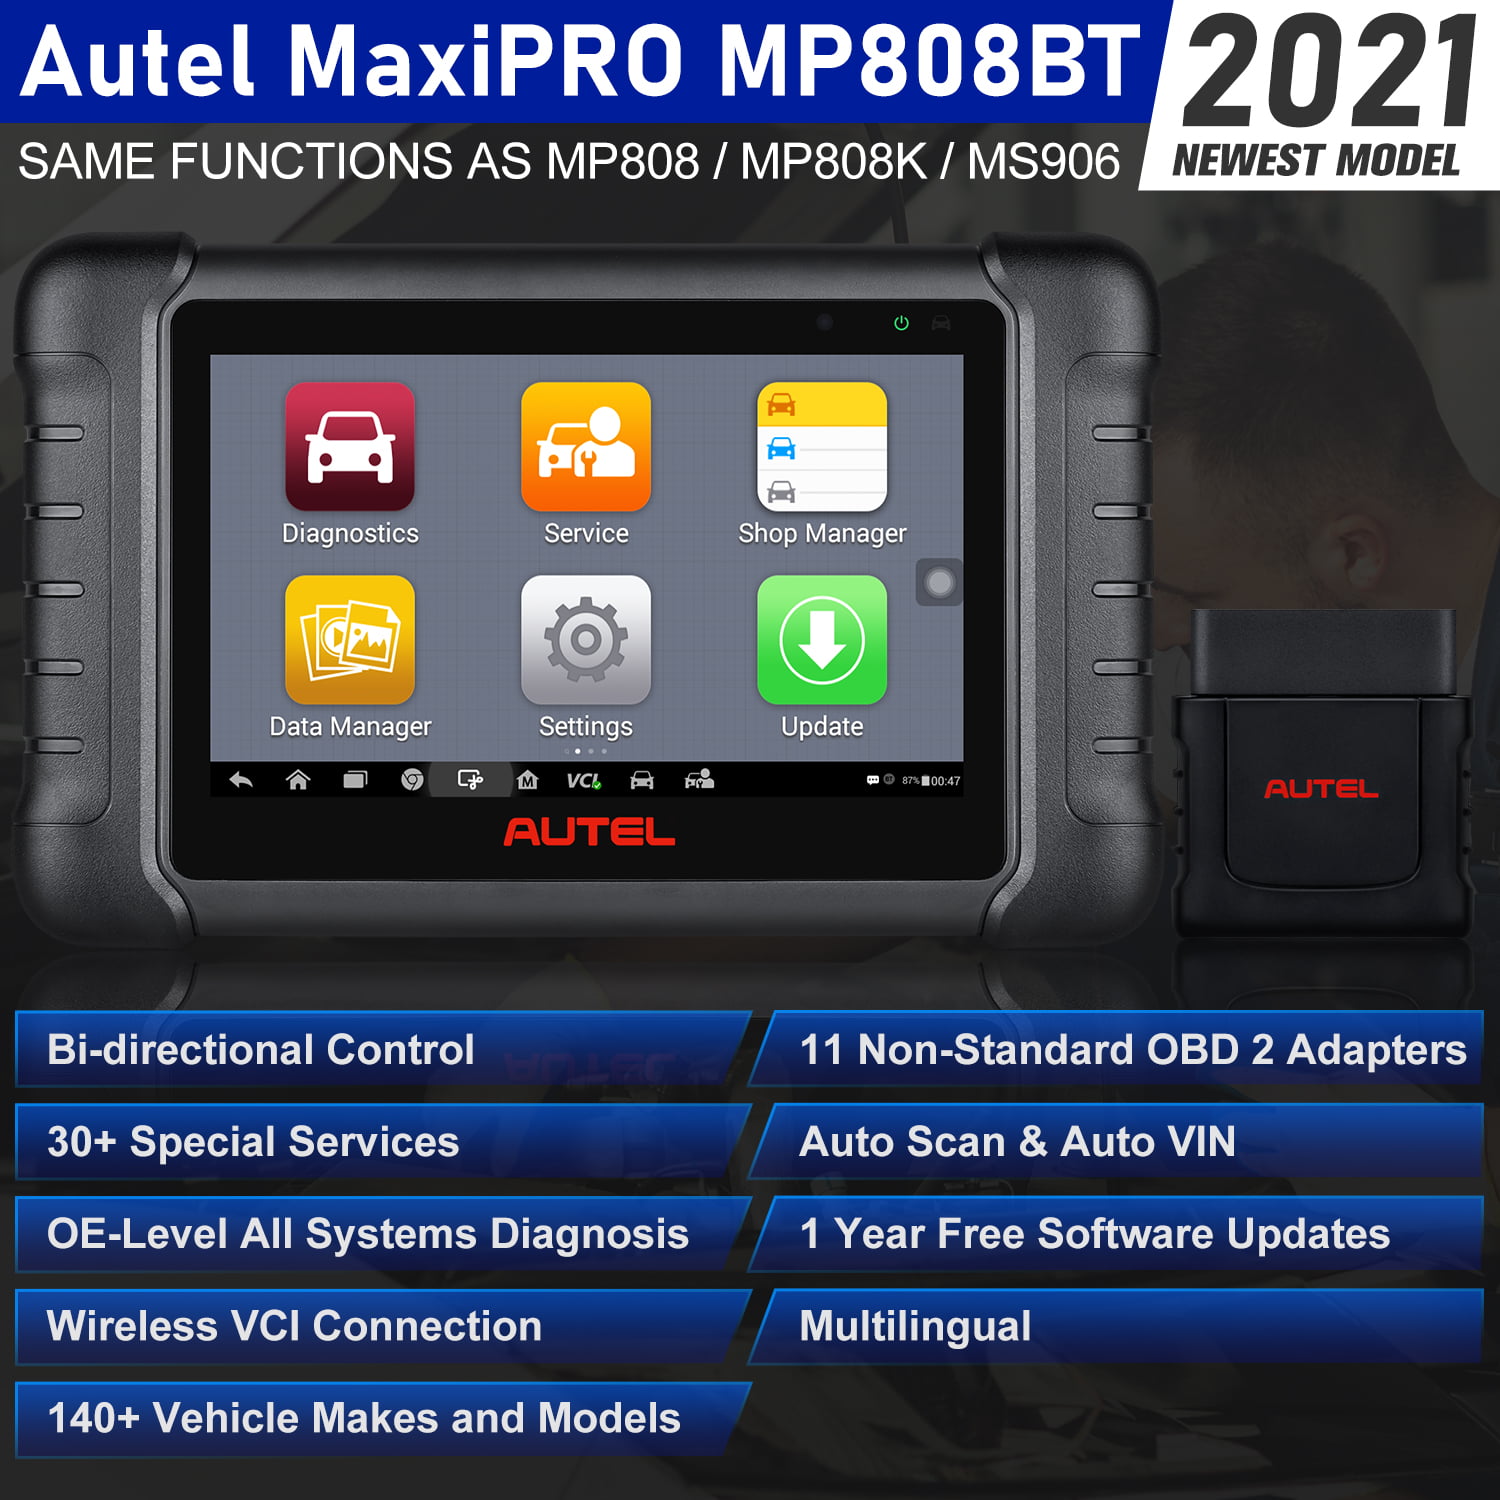 Autel MaxiPRO MP808BT Pro Wireless Diagnostic Scanner, Upgrade of